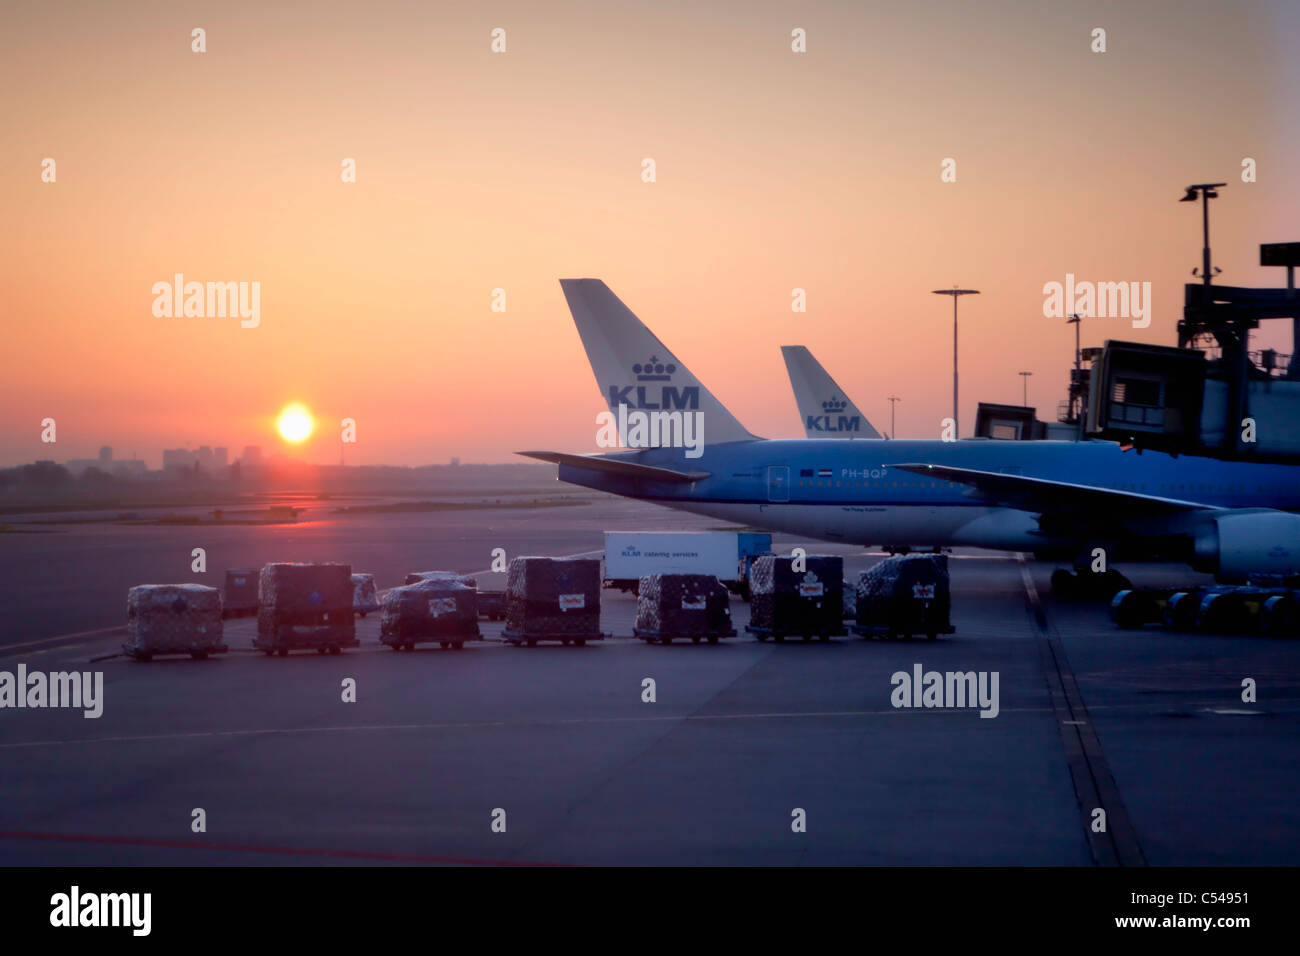 The Netherlands, Amsterdam, KLM airplanes at Schiphol Airport at sunrise. Stock Photo